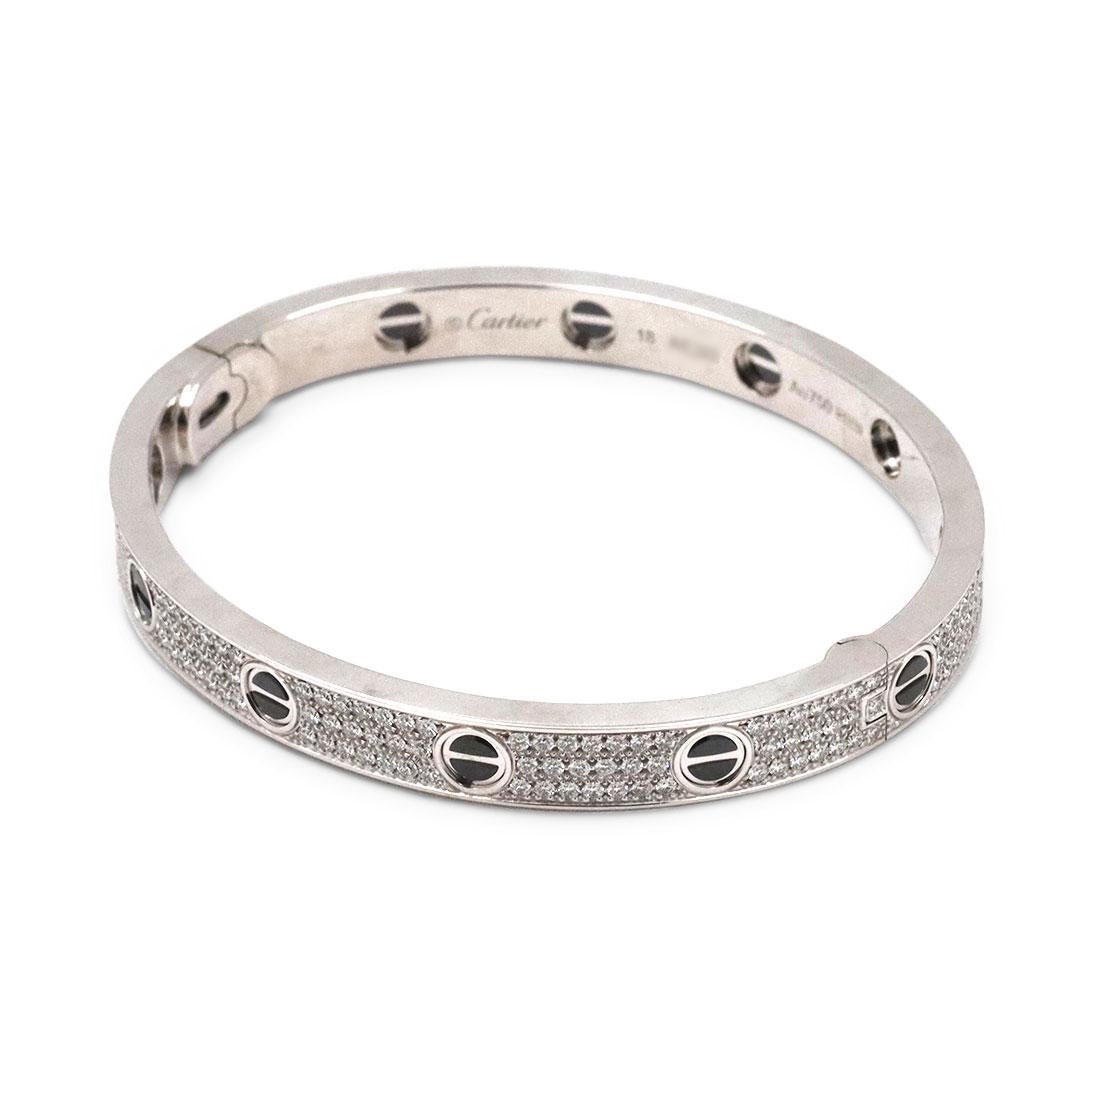 Authentic Cartier 'Love' bangle bracelet crafted in 18 karat white gold with black ceramic screw tops and set with brilliant cut diamonds (D-F in color, VVS clarity) weighing an estimated 2 carats total. Signed Cartier, size 18, Au750, with serial